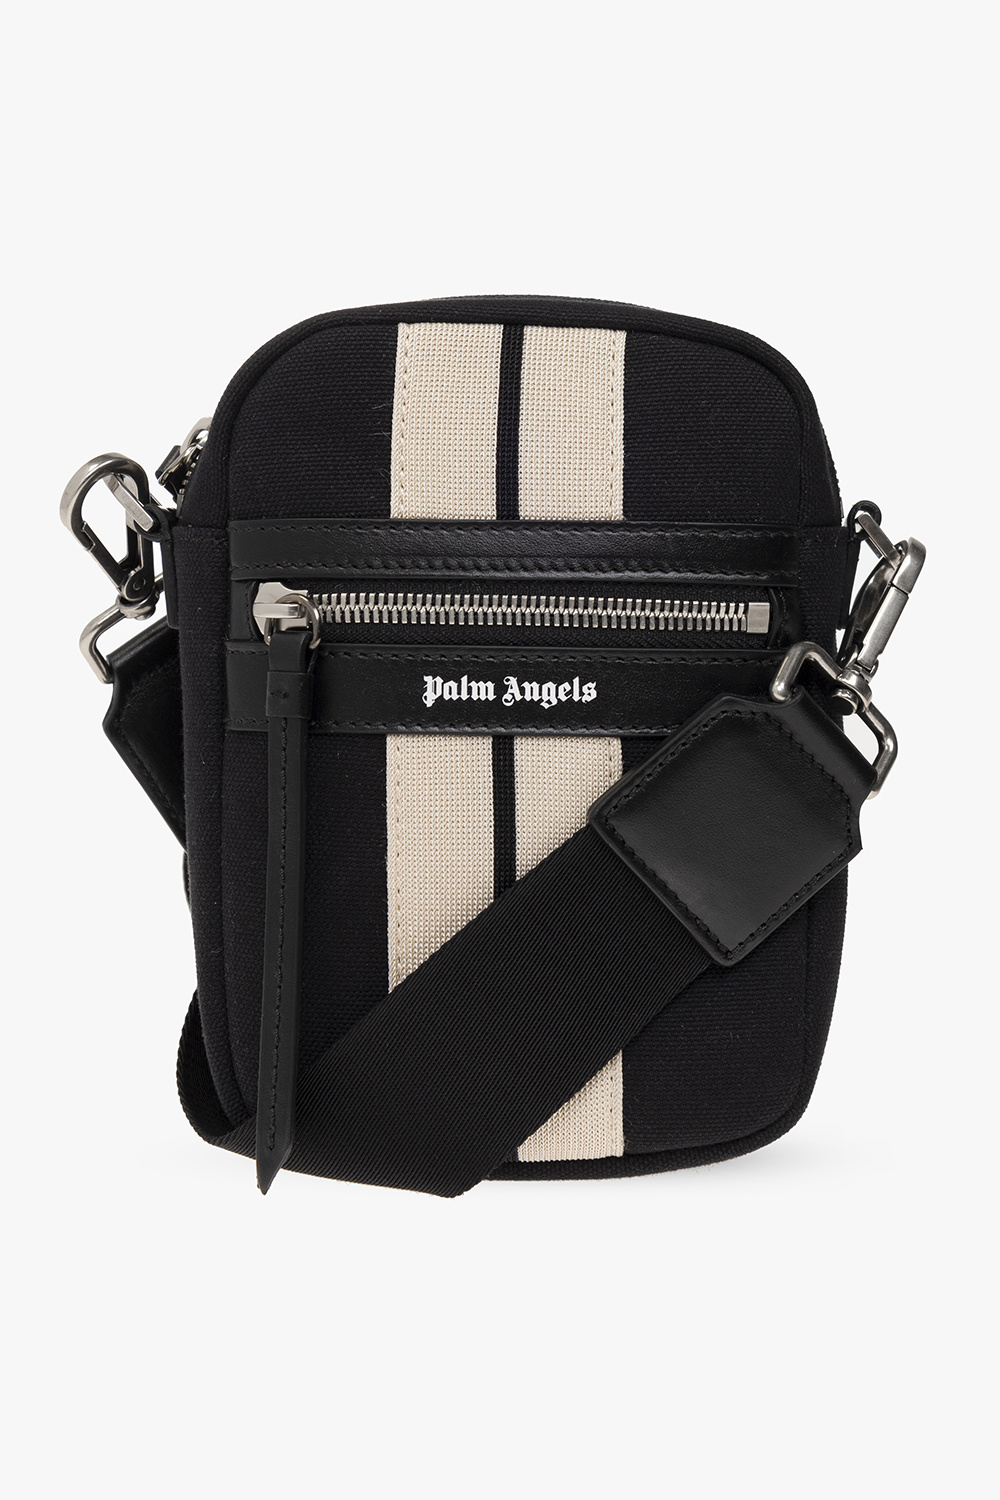 Palm Angels Explorafunk Empire backpack